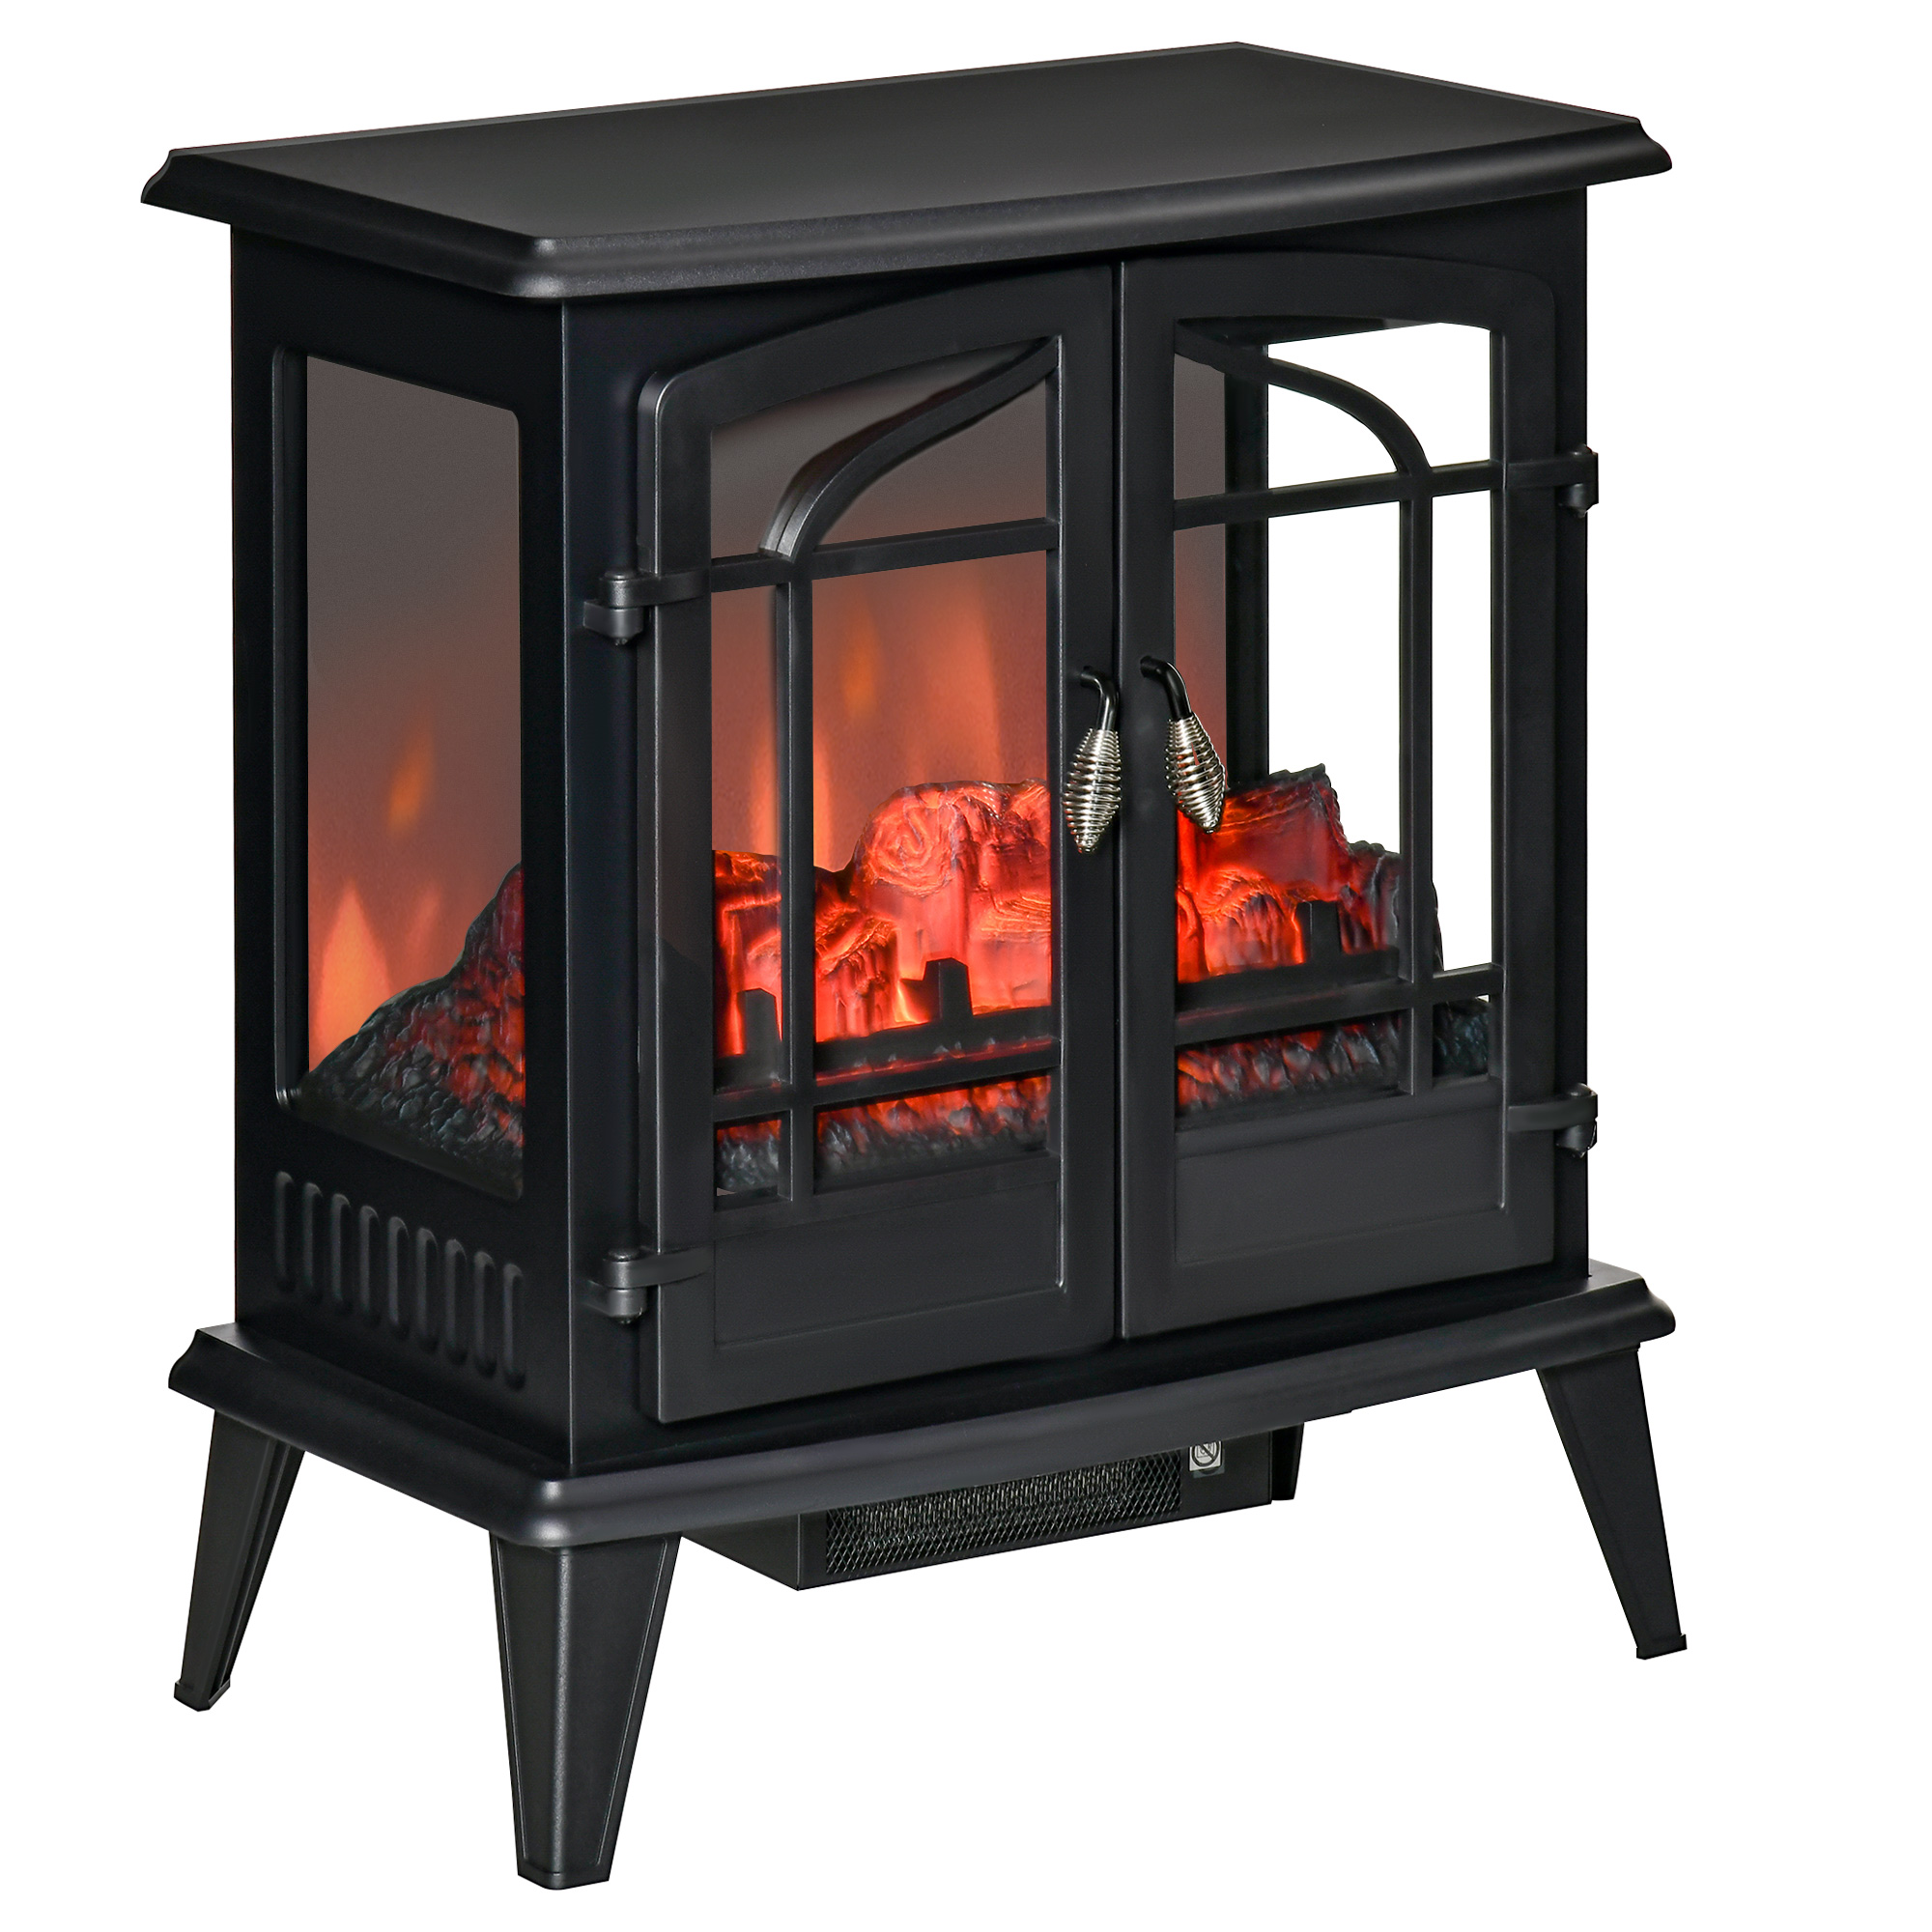 HOMCOM Electric Fireplace Heater Fireplace Stove with Overheat Protection 